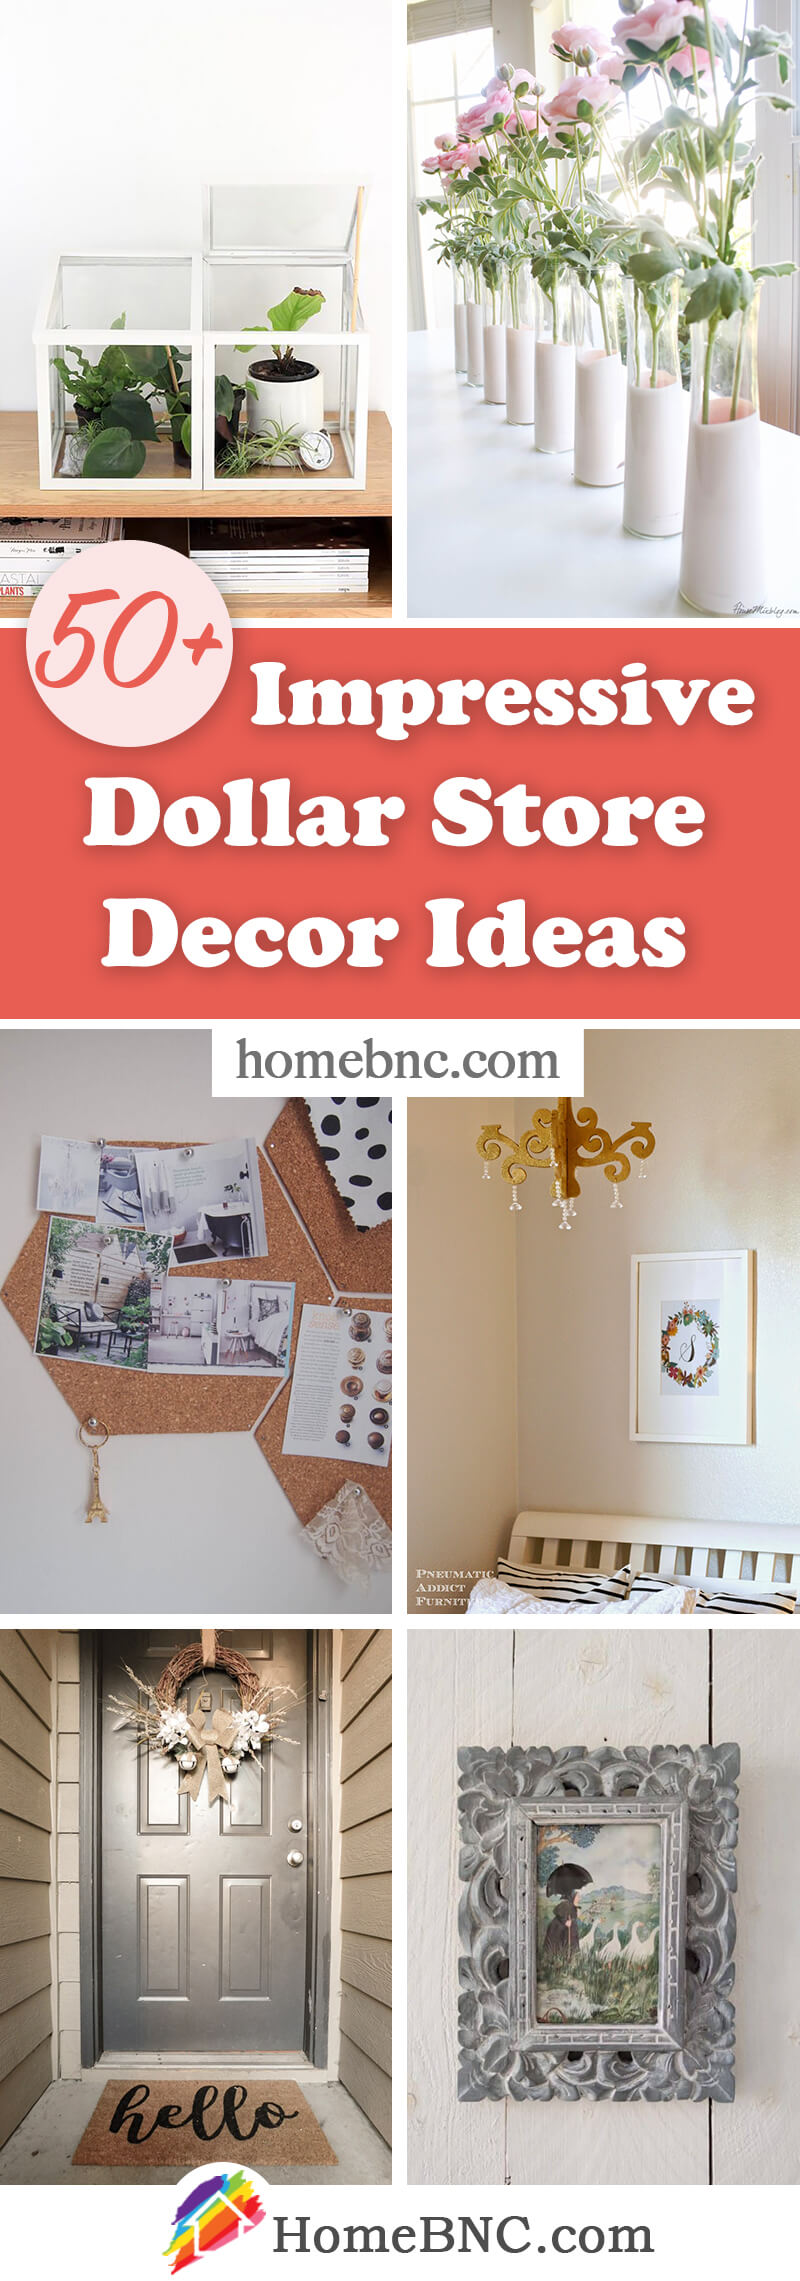 DIY Dollar Store Home Decorations